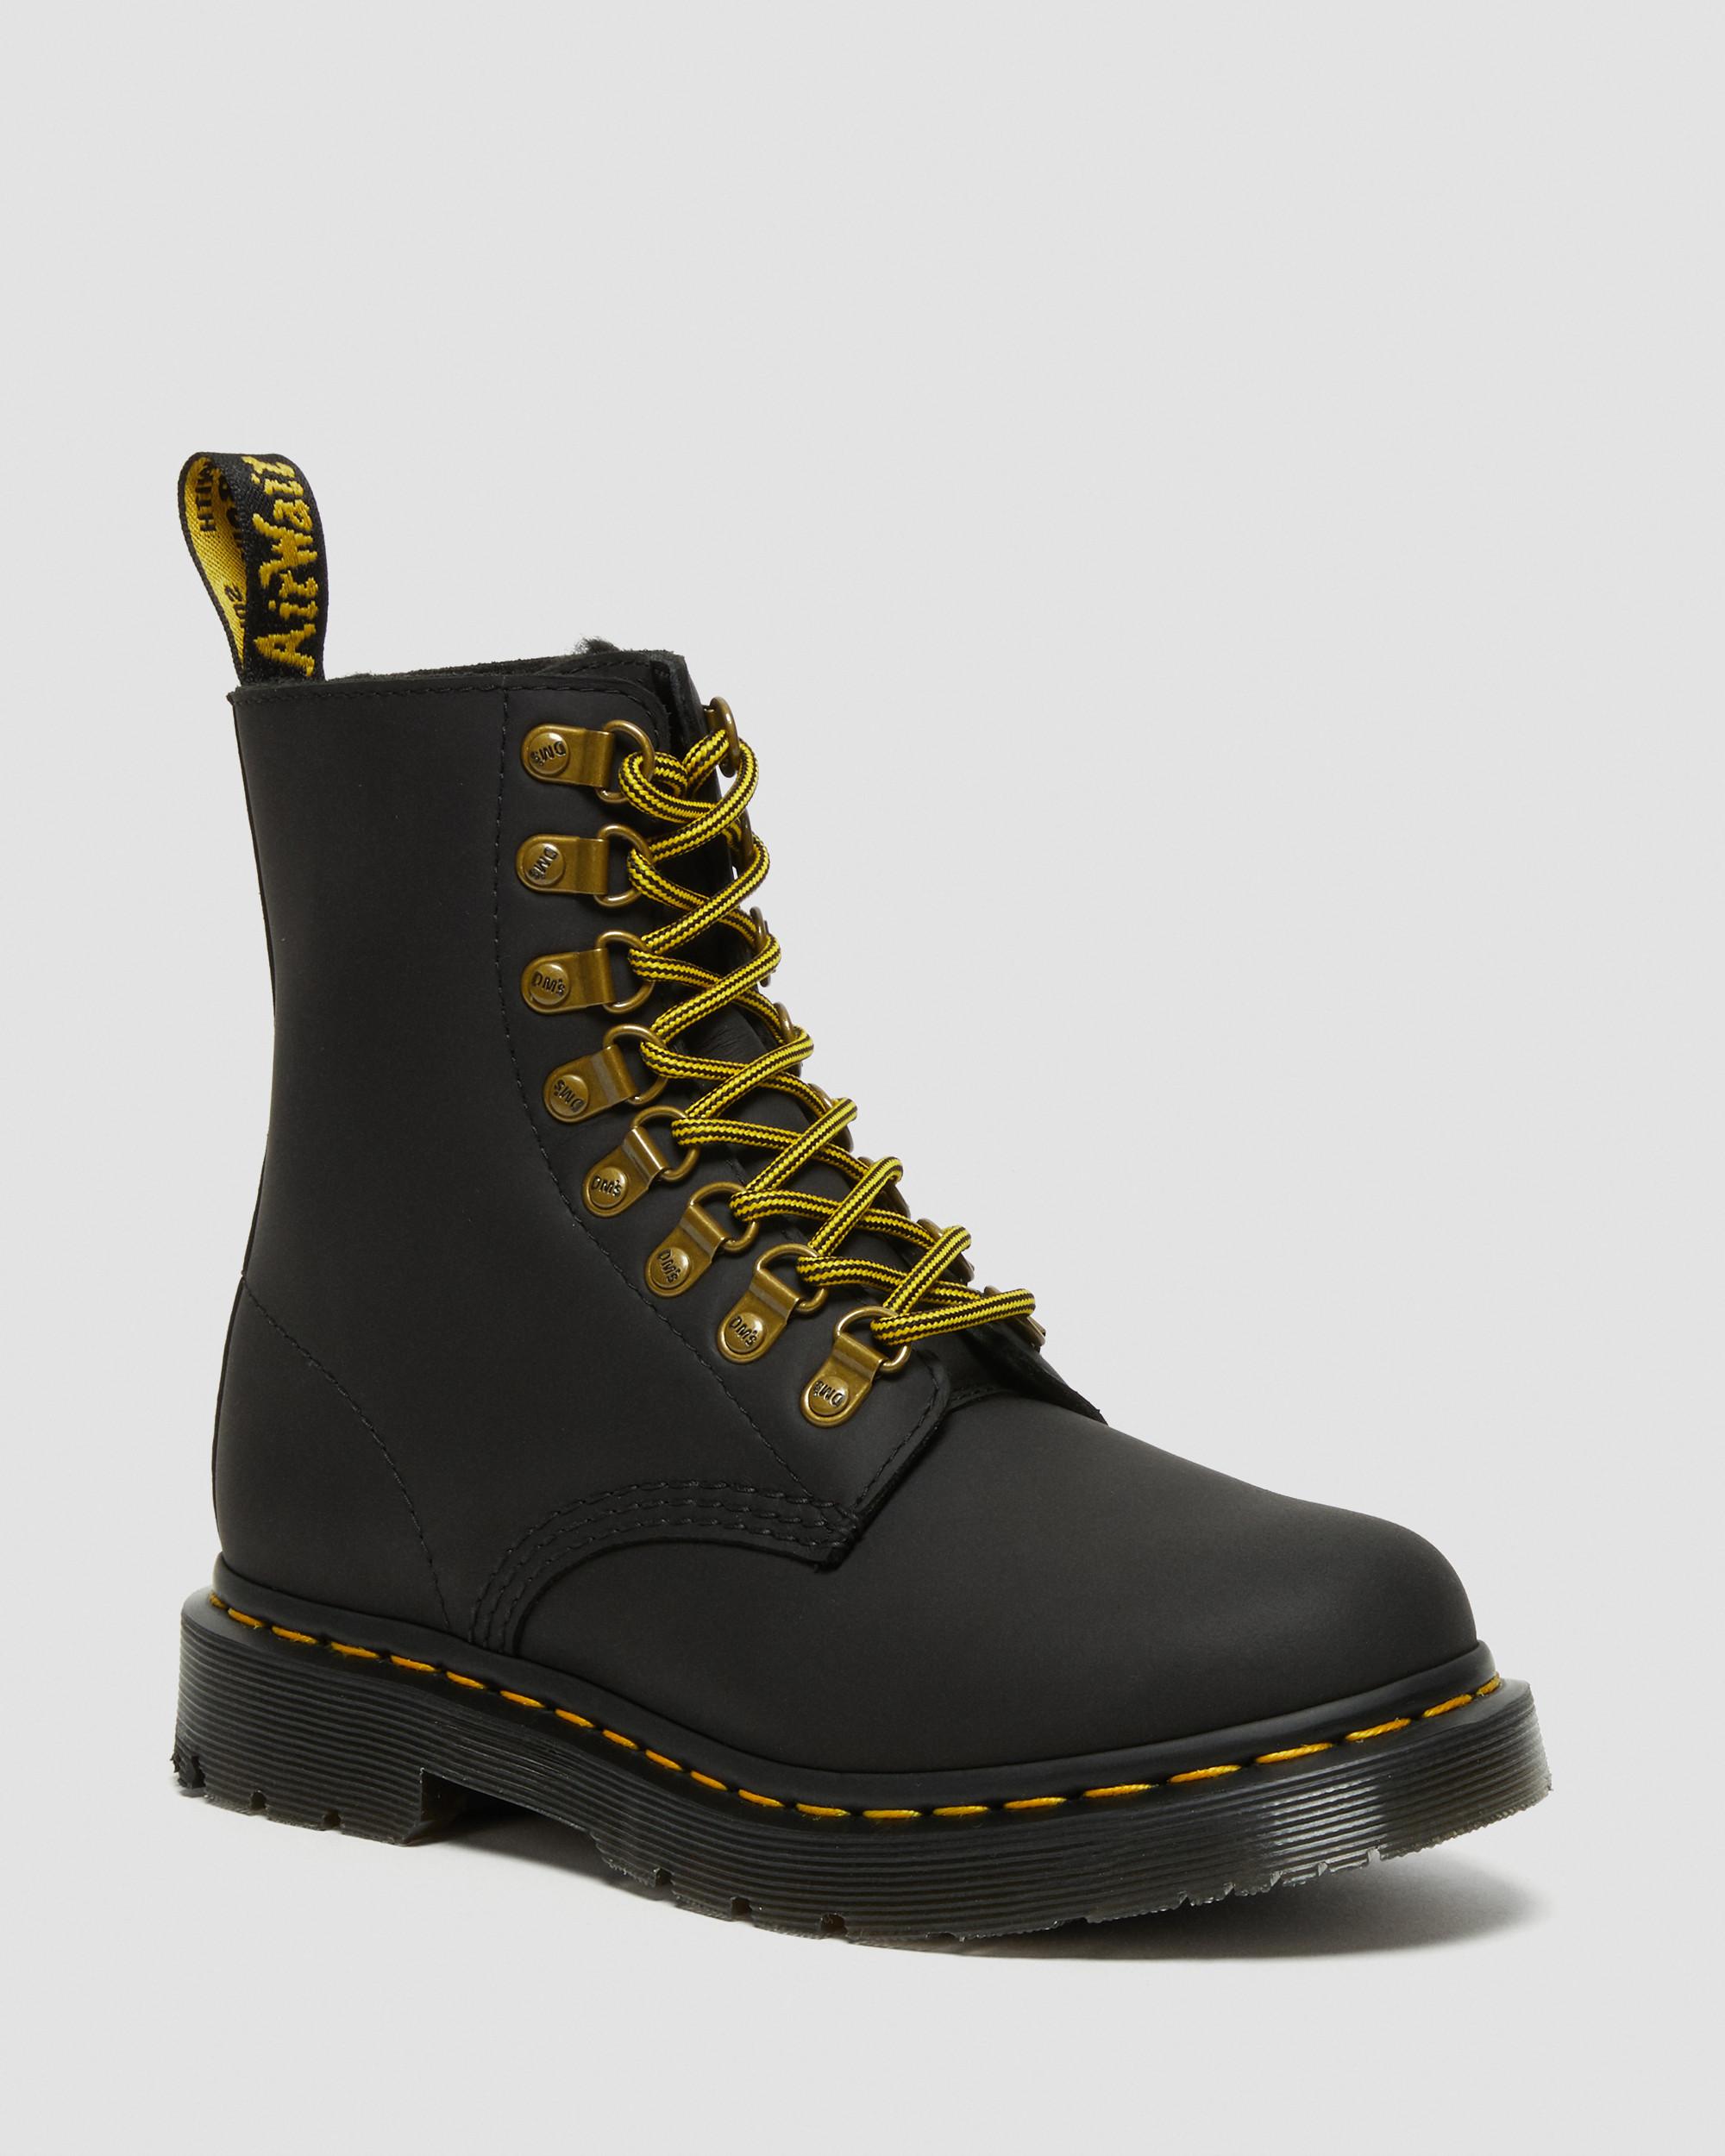 1460 PascalDM's Wintergrip Leather Ankle Boots in Black | Dr. Martens